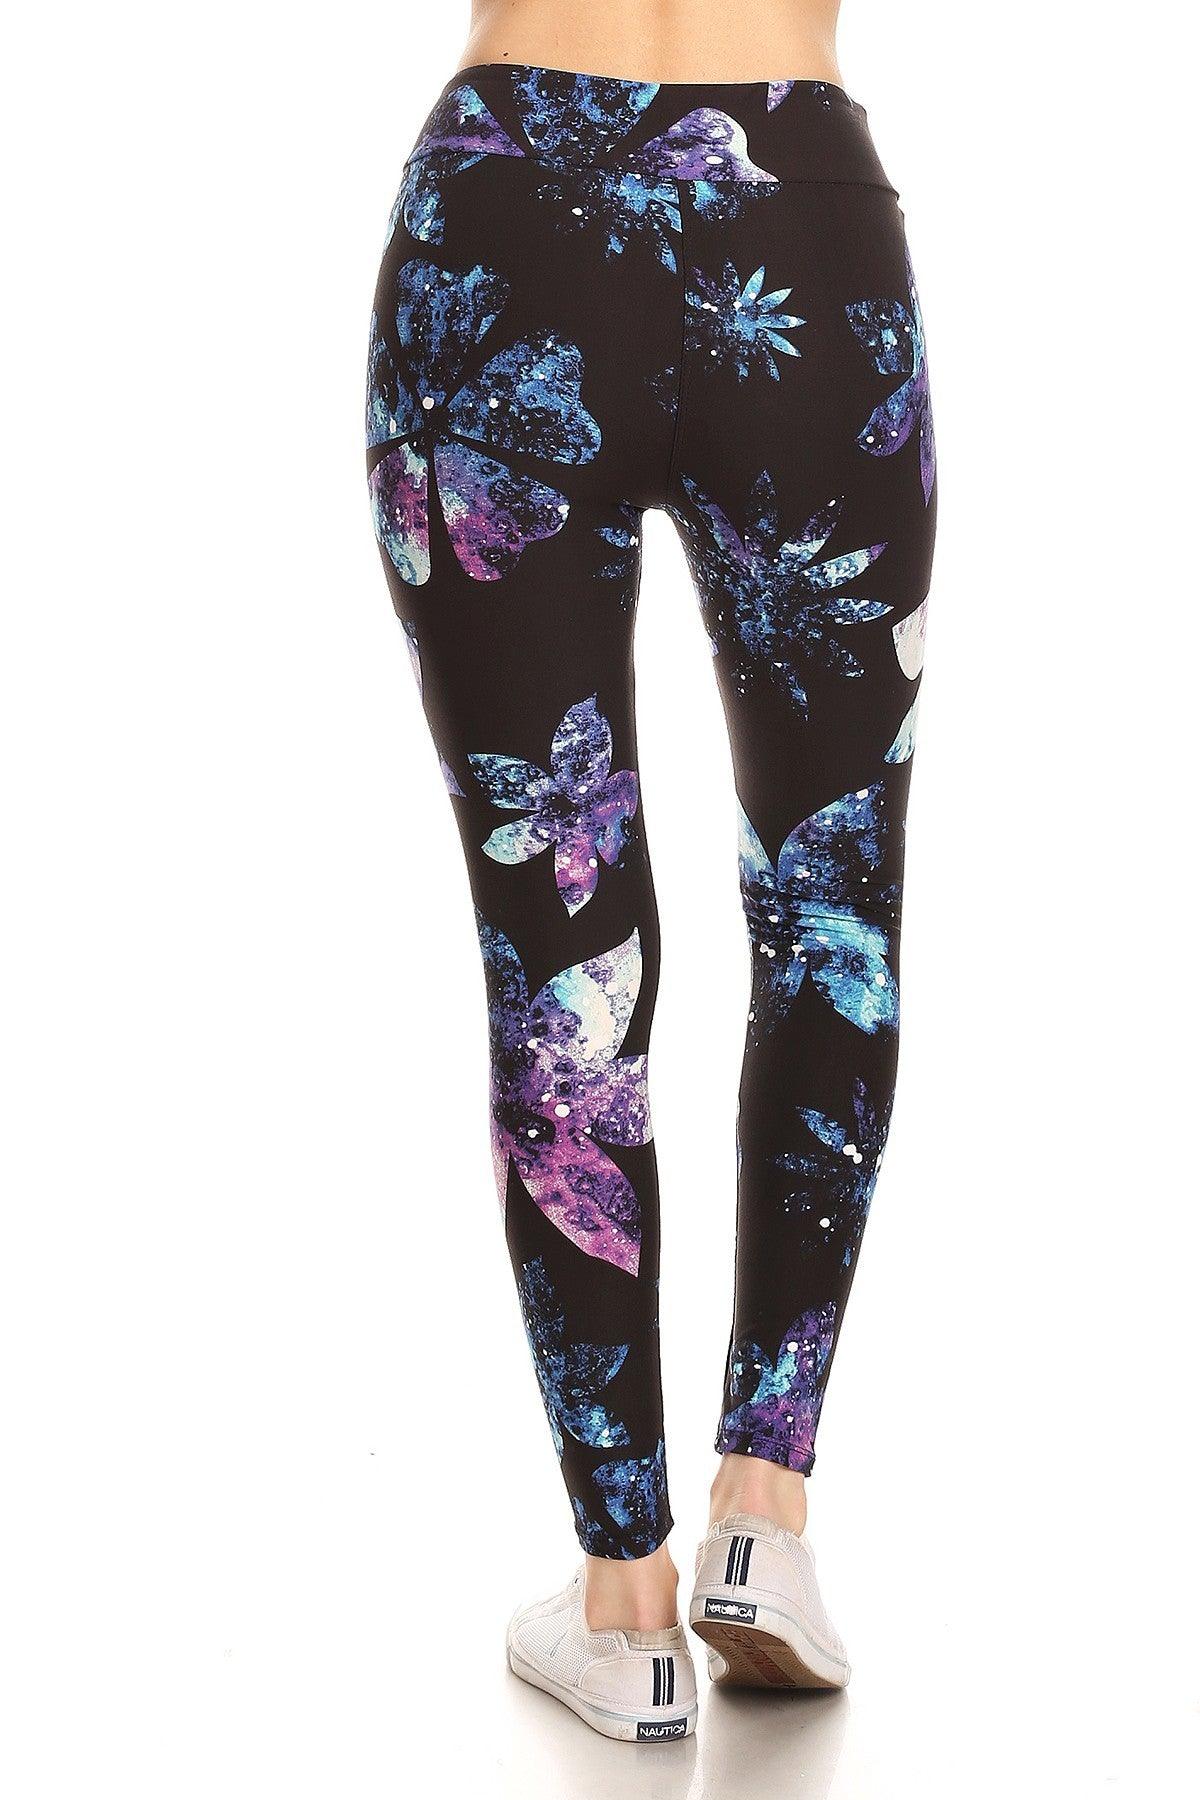 Yoga Style Banded Lined Galaxy Silhouette Floral Print, Full Length Leggings In A Slim Fitting Style With A Banded High Waist Naughty Smile Fashion